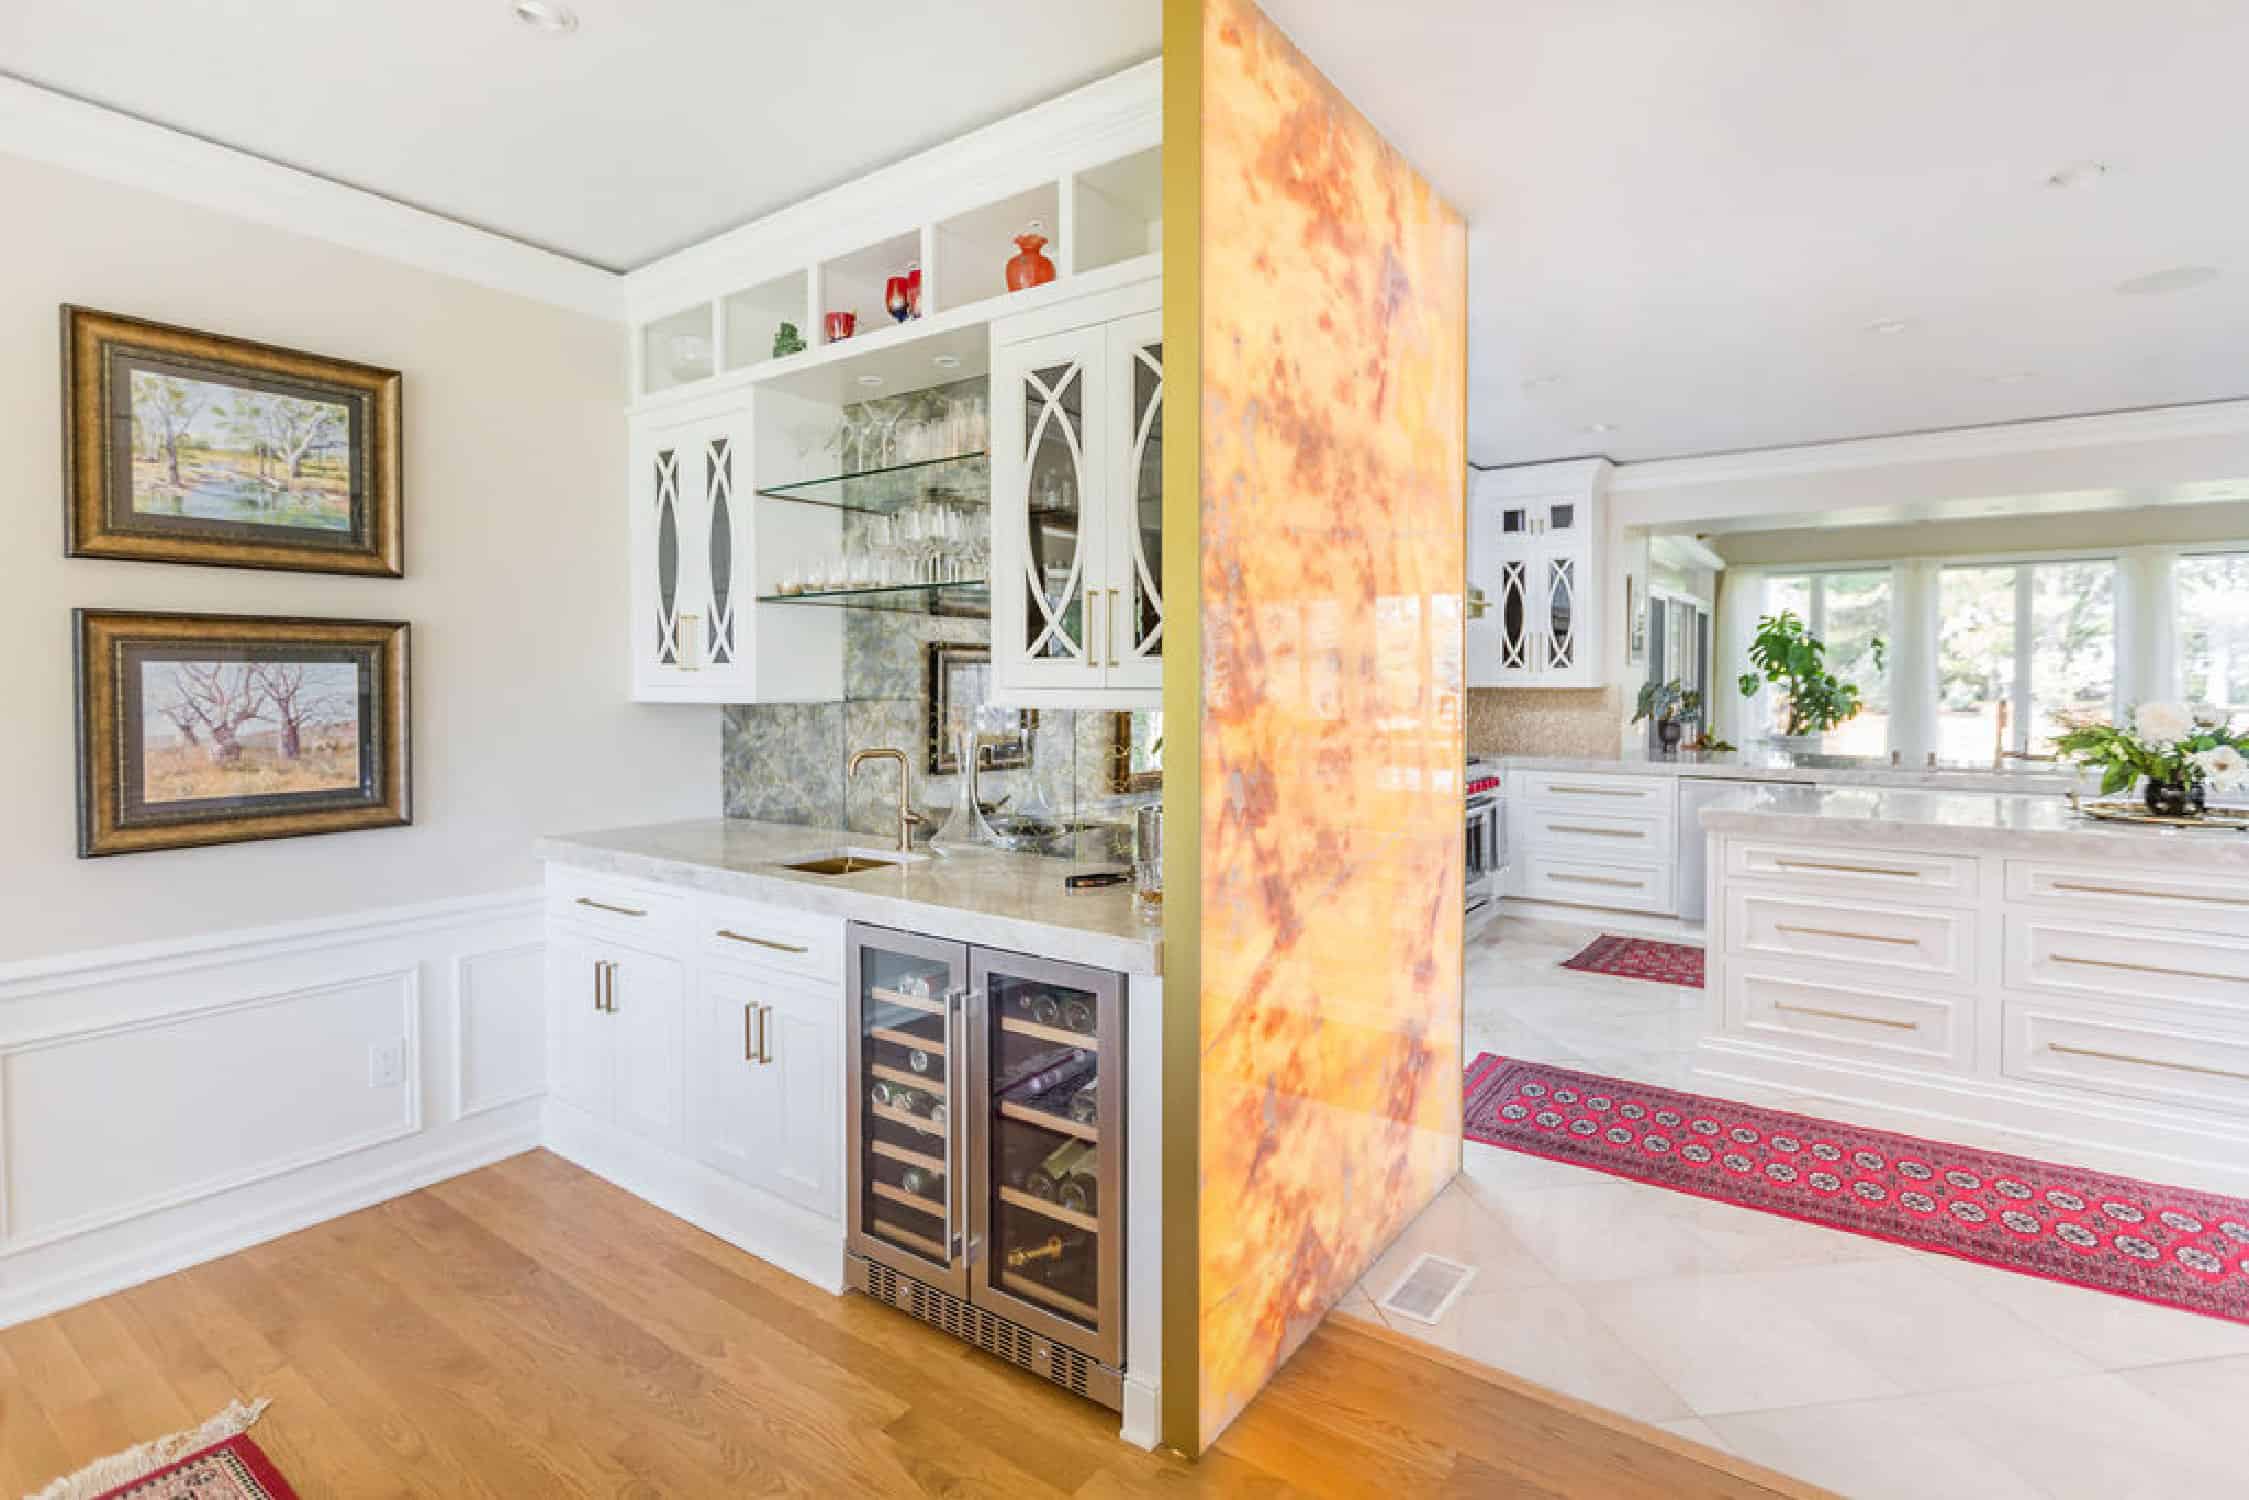 Nicholas Design Build | Remodeling a kitchen to include a door leading to a wine cellar.